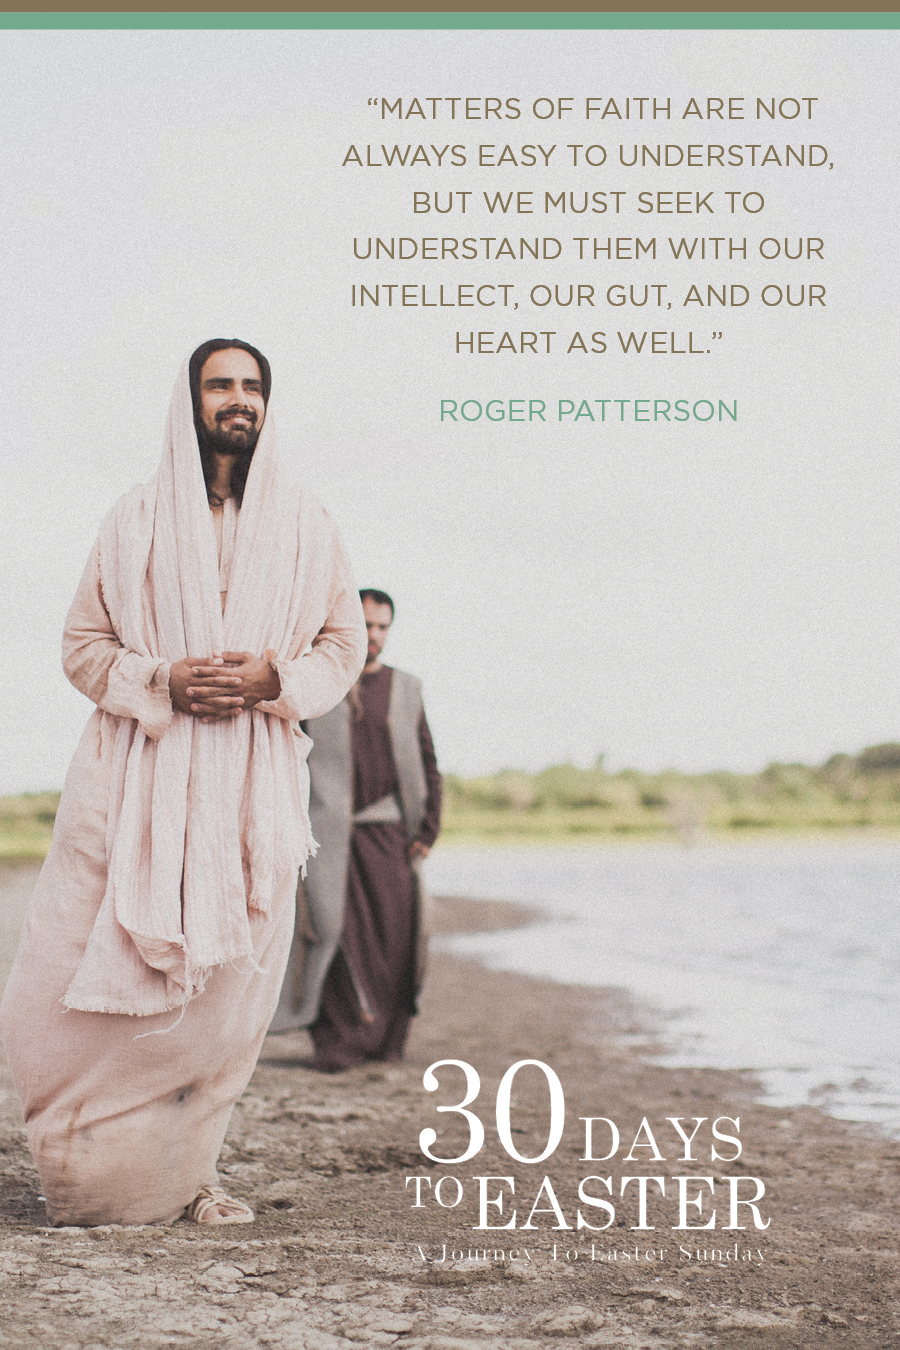 “Matters of faith are not always easy to understand, but we must seek to understand them with our intellect, our gut, and our heart as well.”